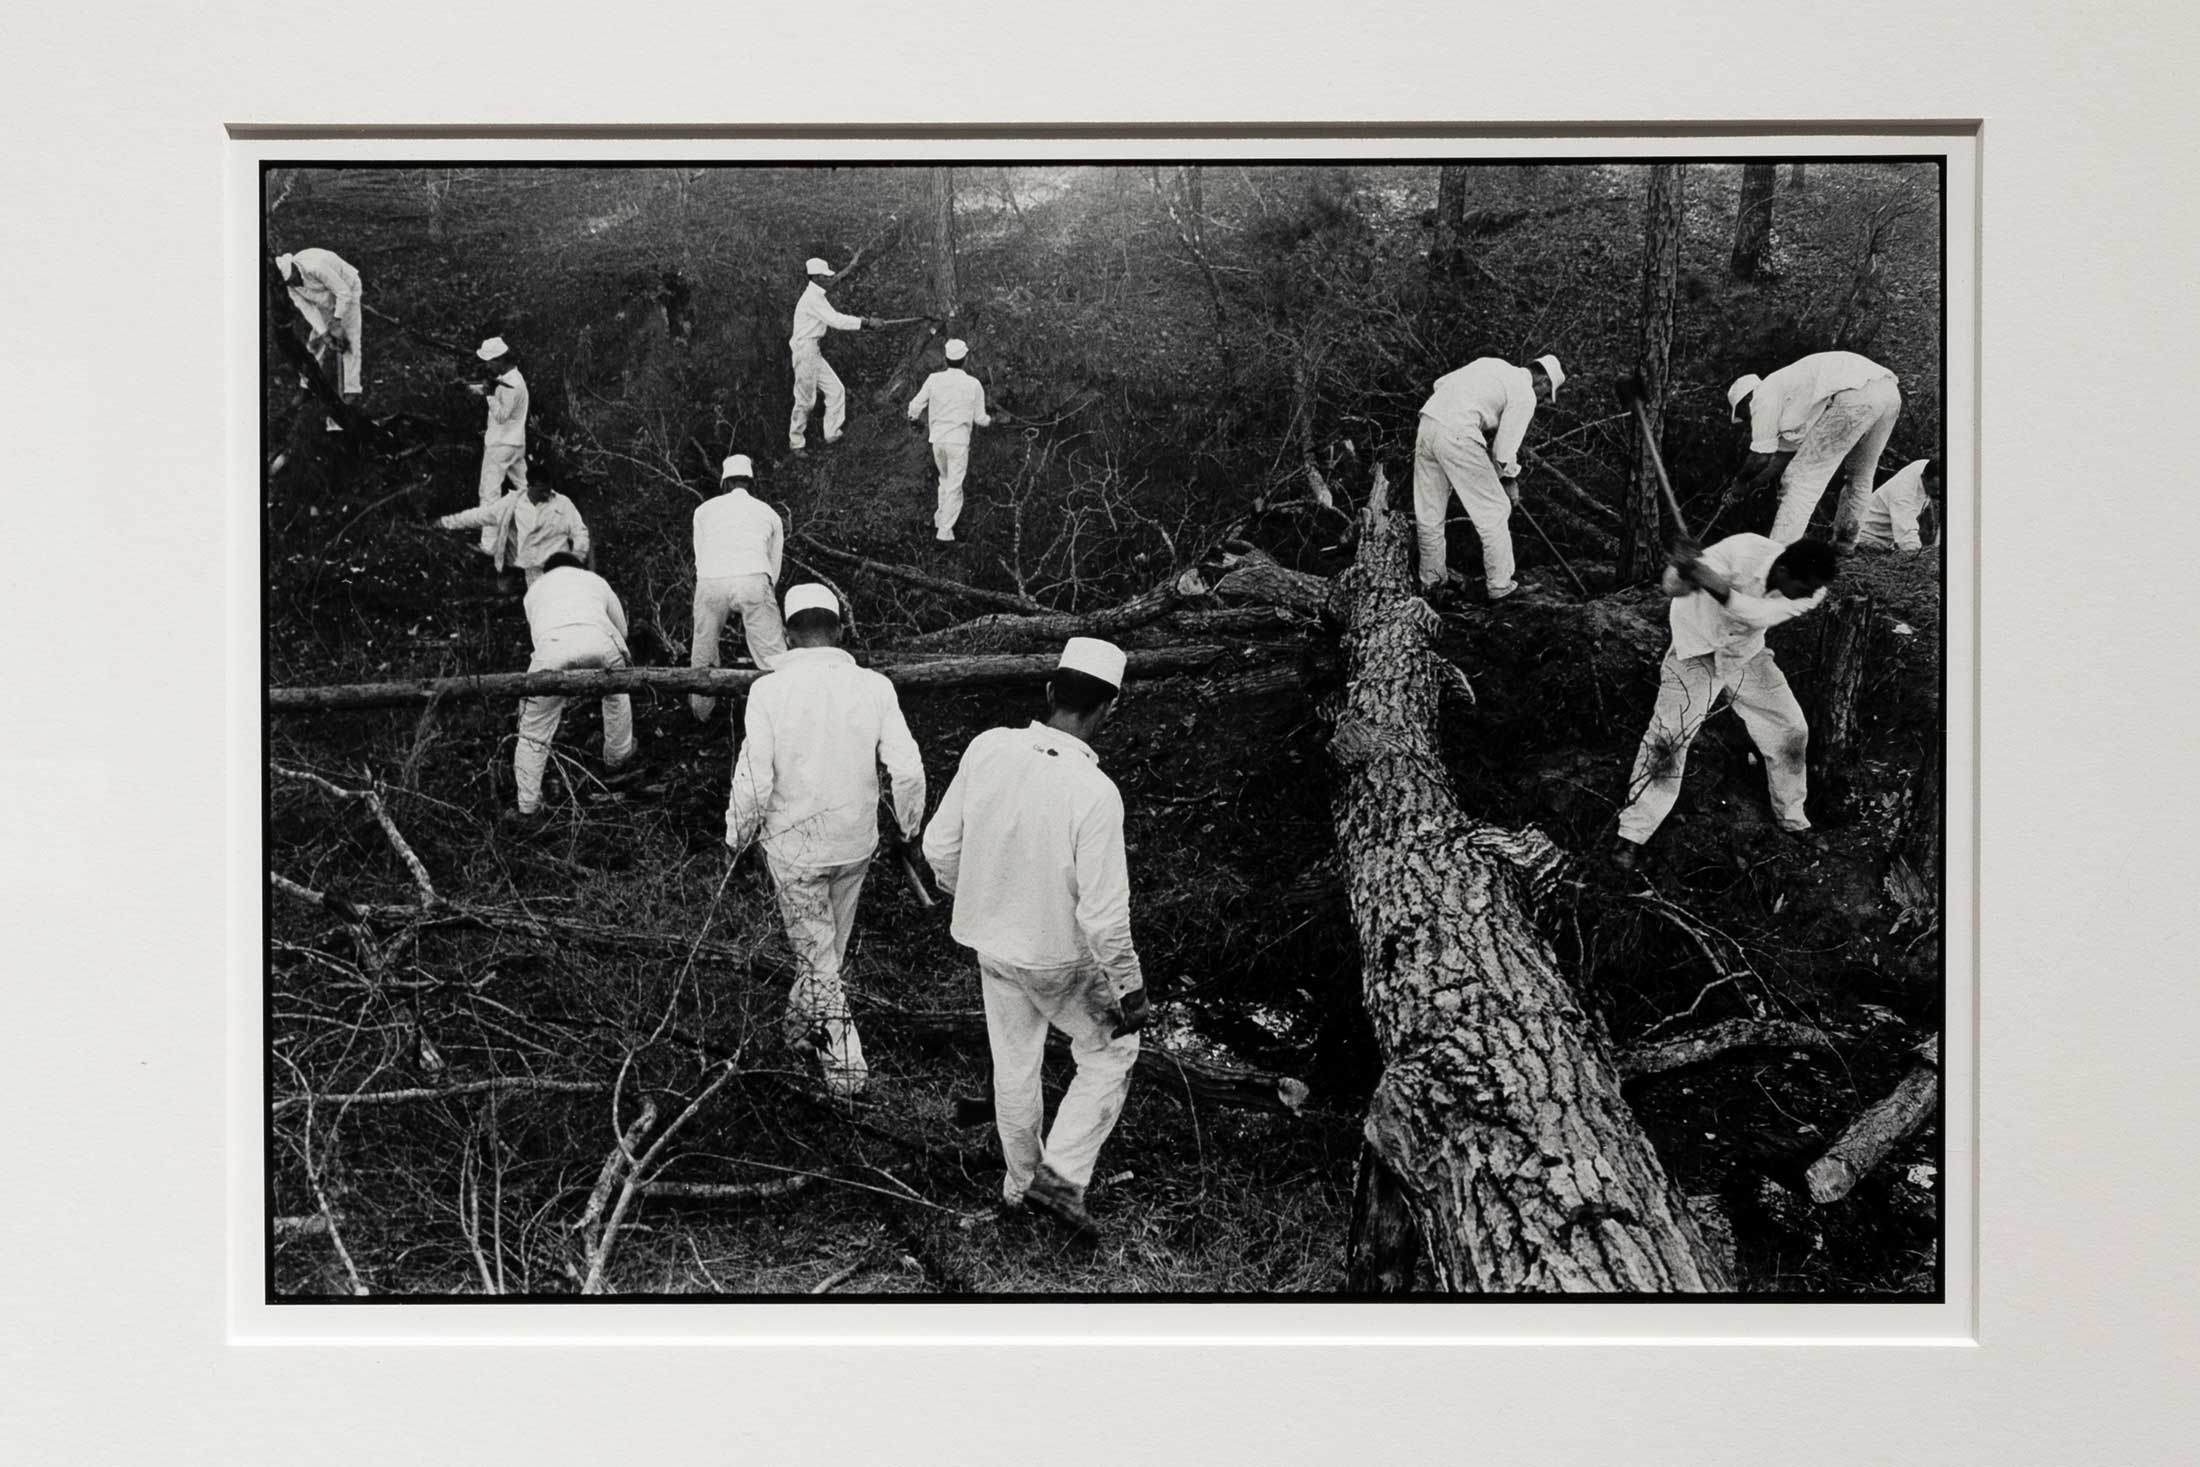 Clearing Land, Conversation with the Dead by Danny Lyon